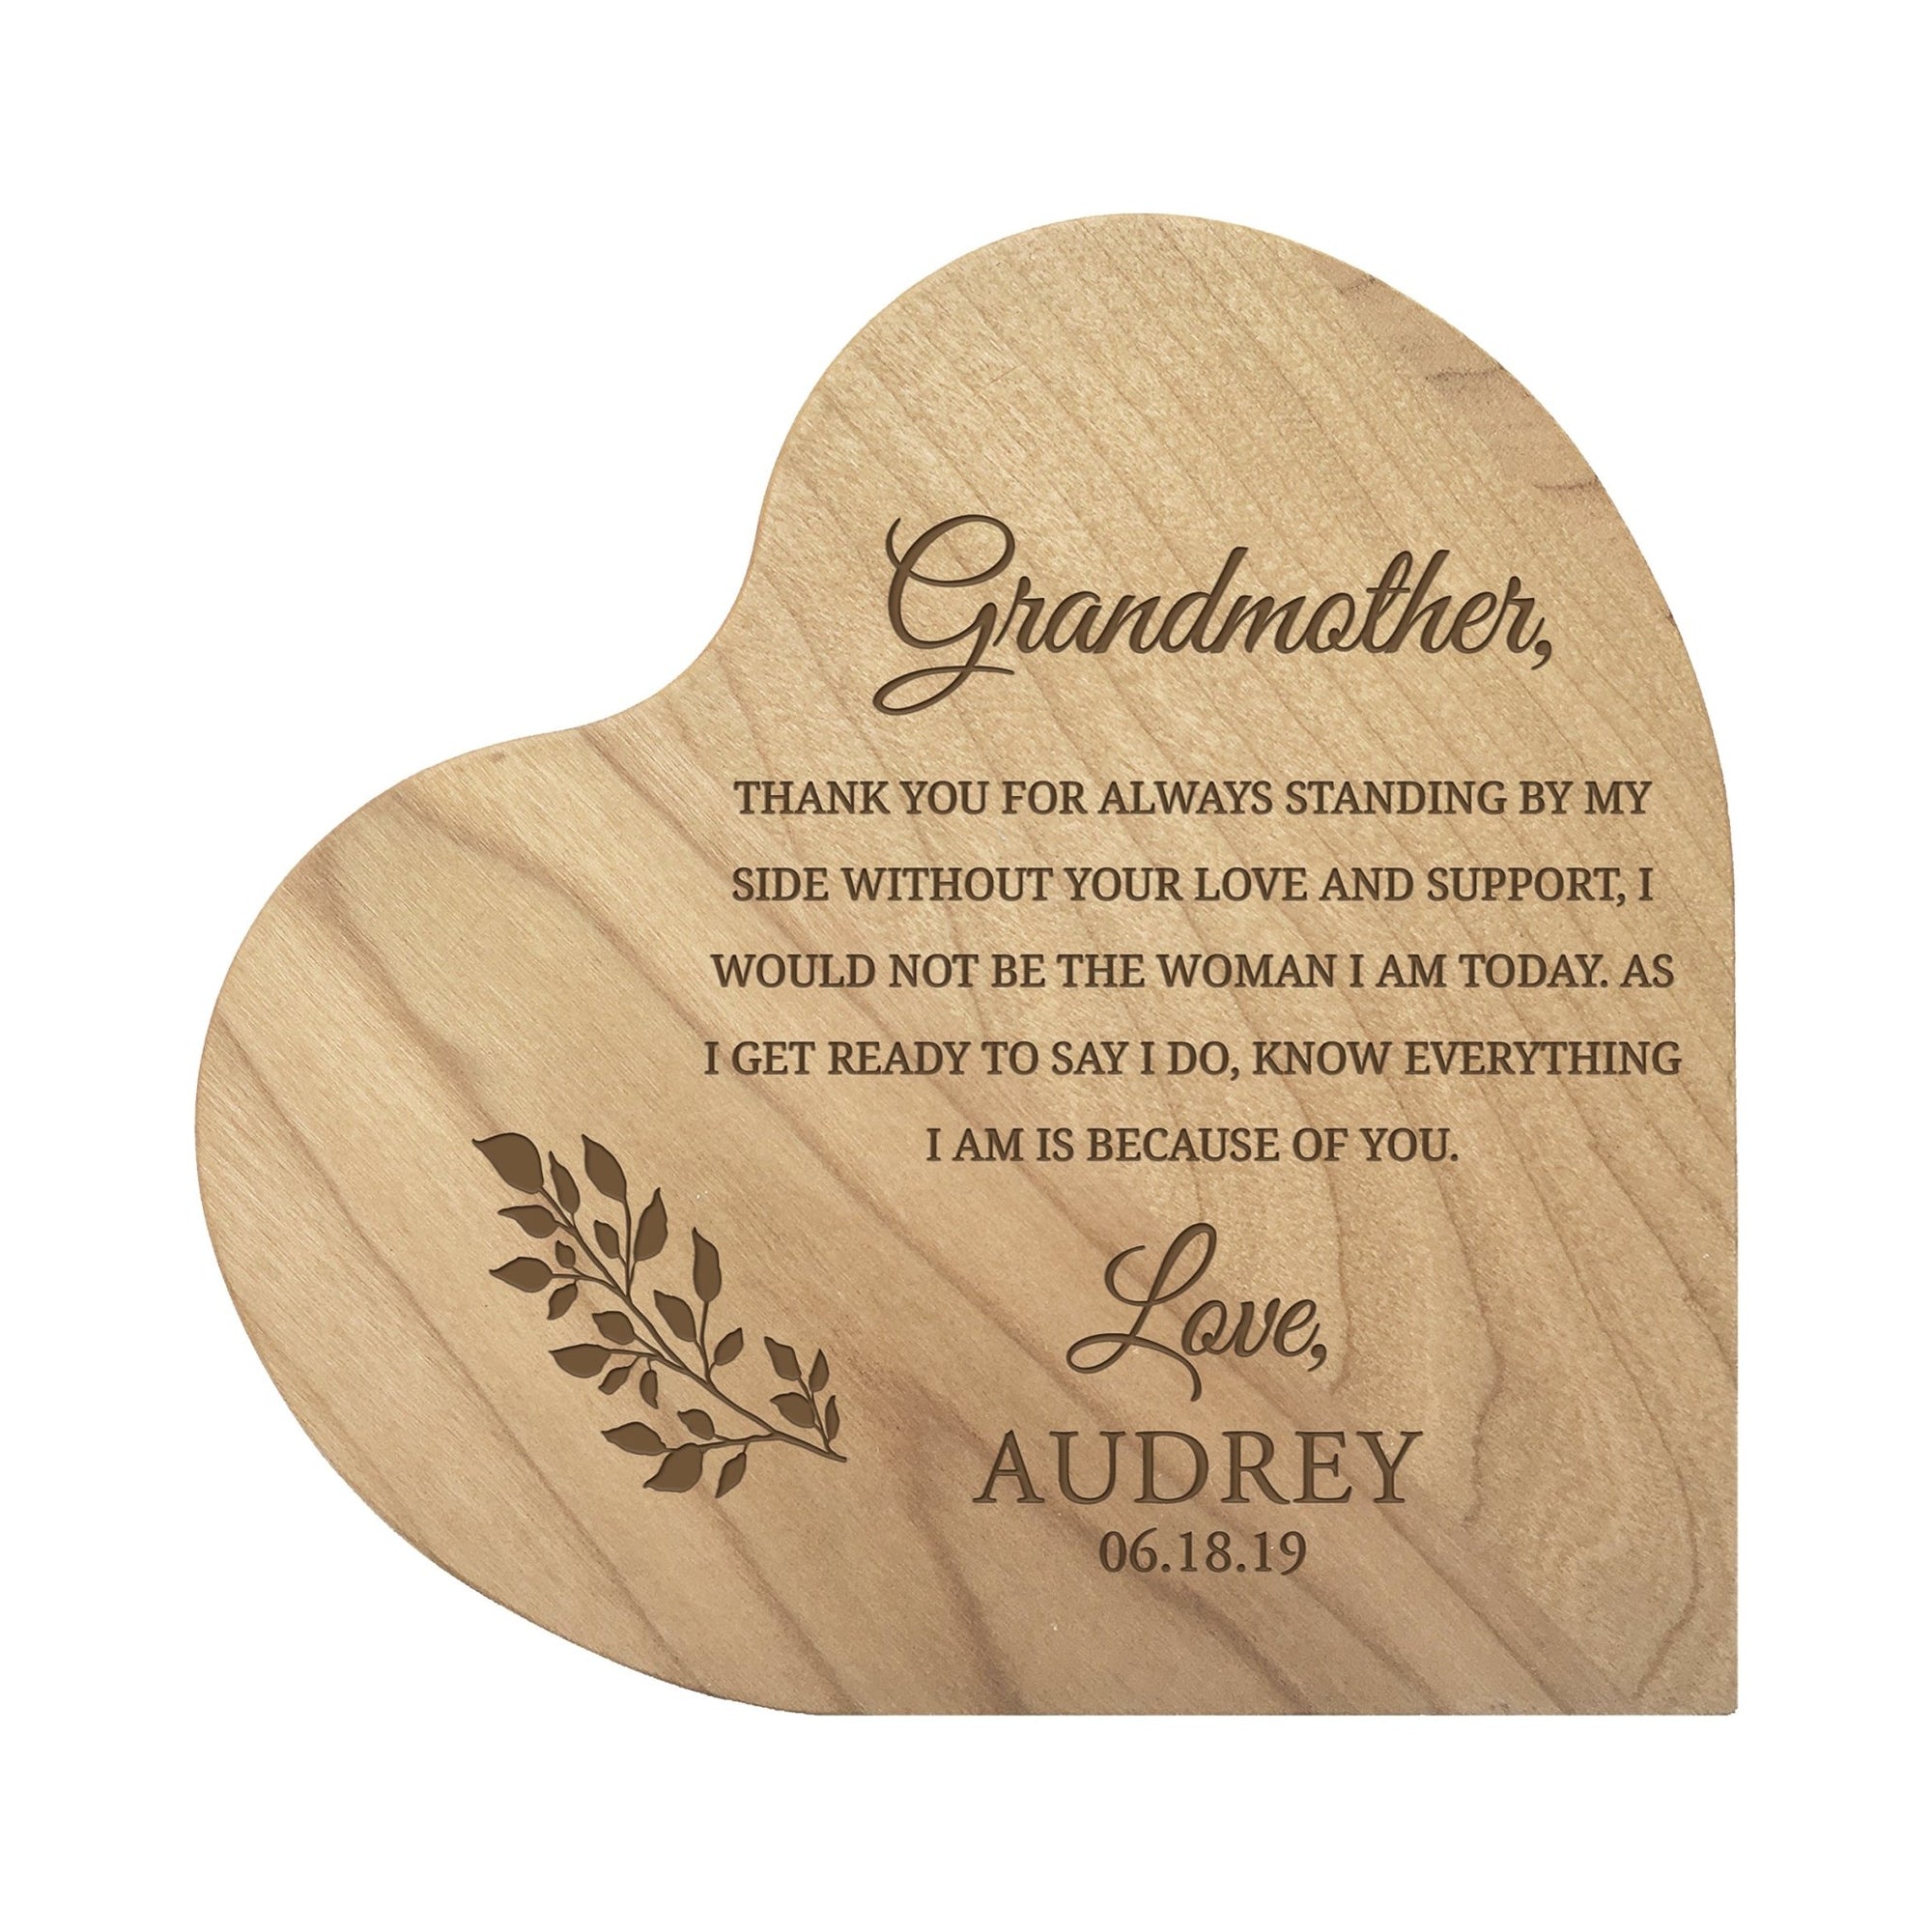 Personalized Modern Grandmother’s Love Solid Wood Heart Decoration With Inspirational Verse Keepsake Gift 5x5.25 - Grandmom, Thank You For Always = Love And Support - LifeSong Milestones